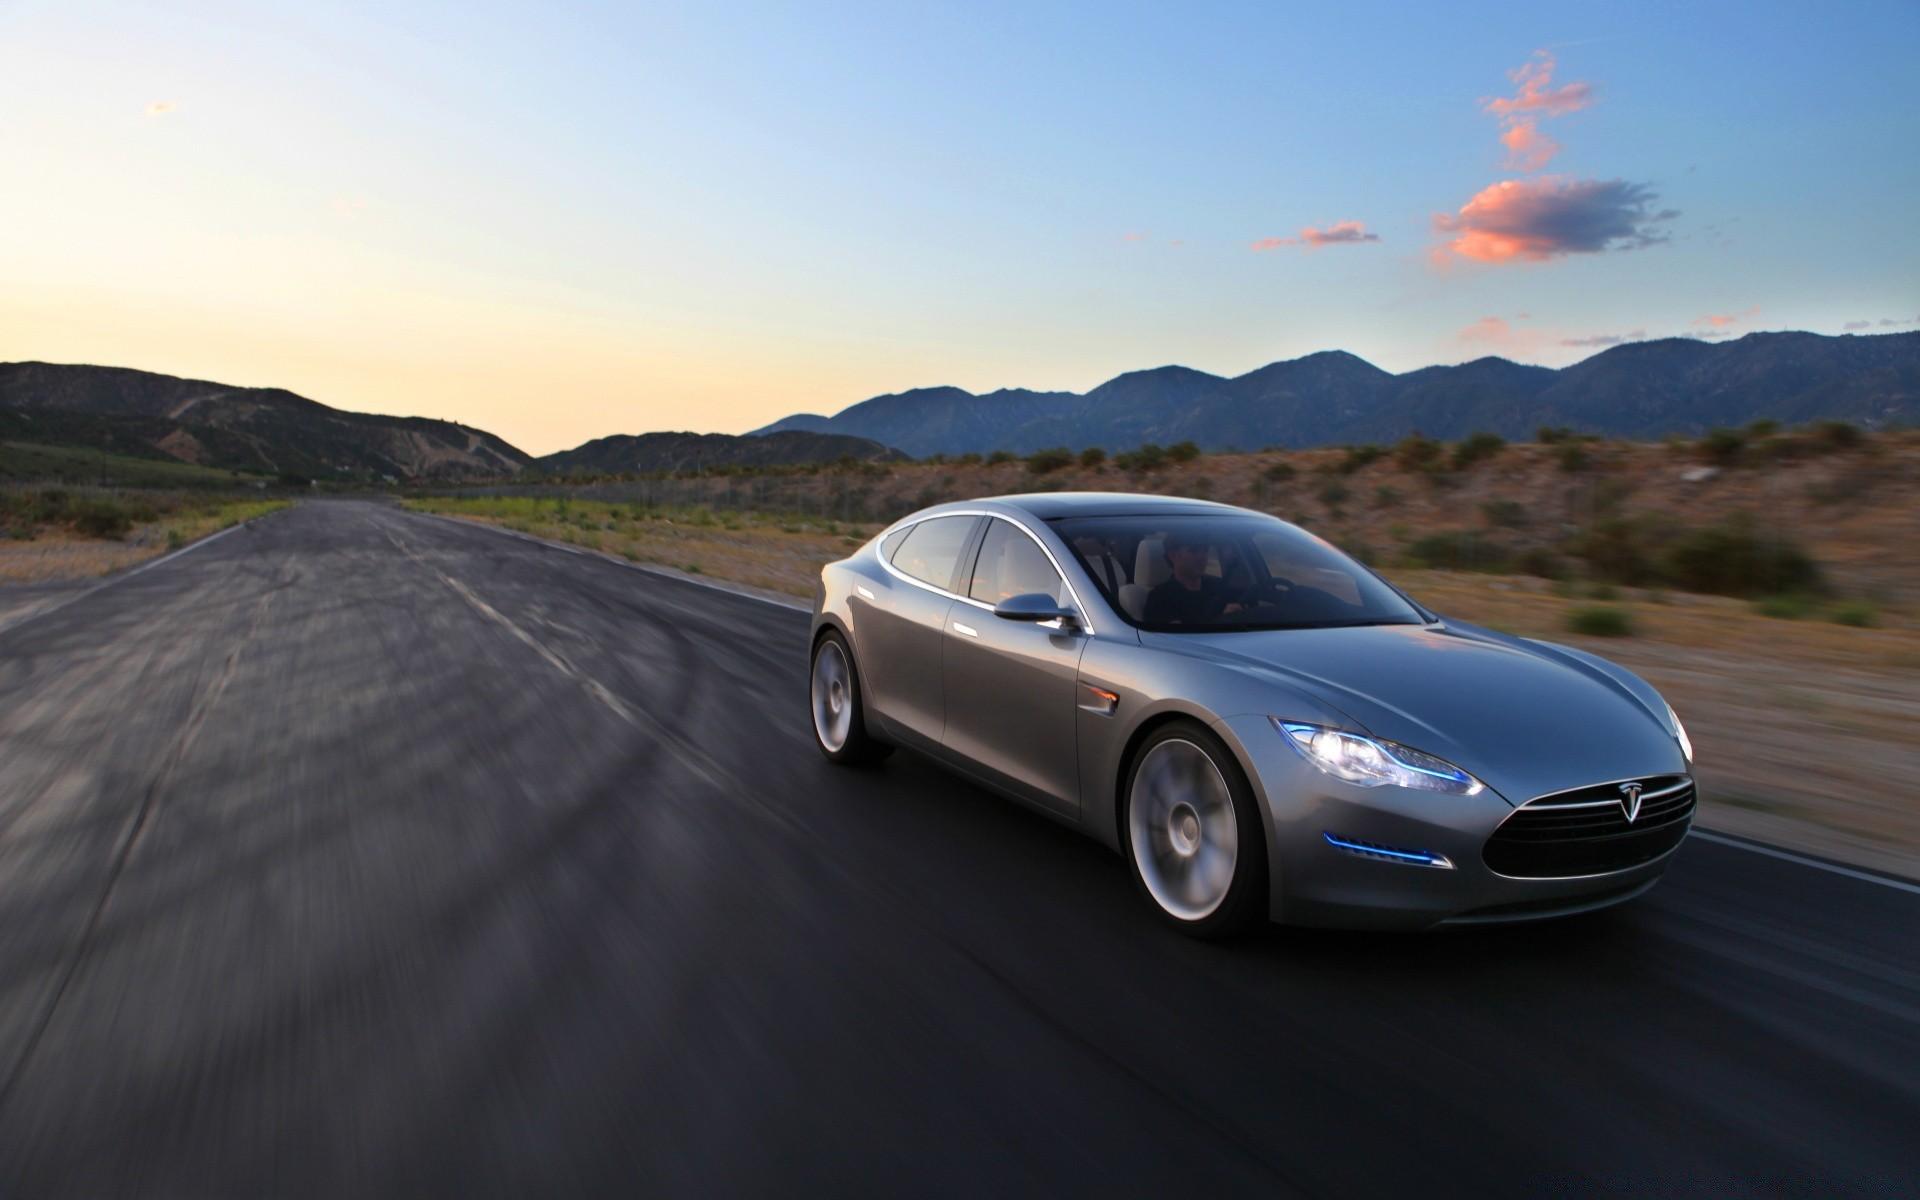 Tesla Model S. Android wallpaper for free